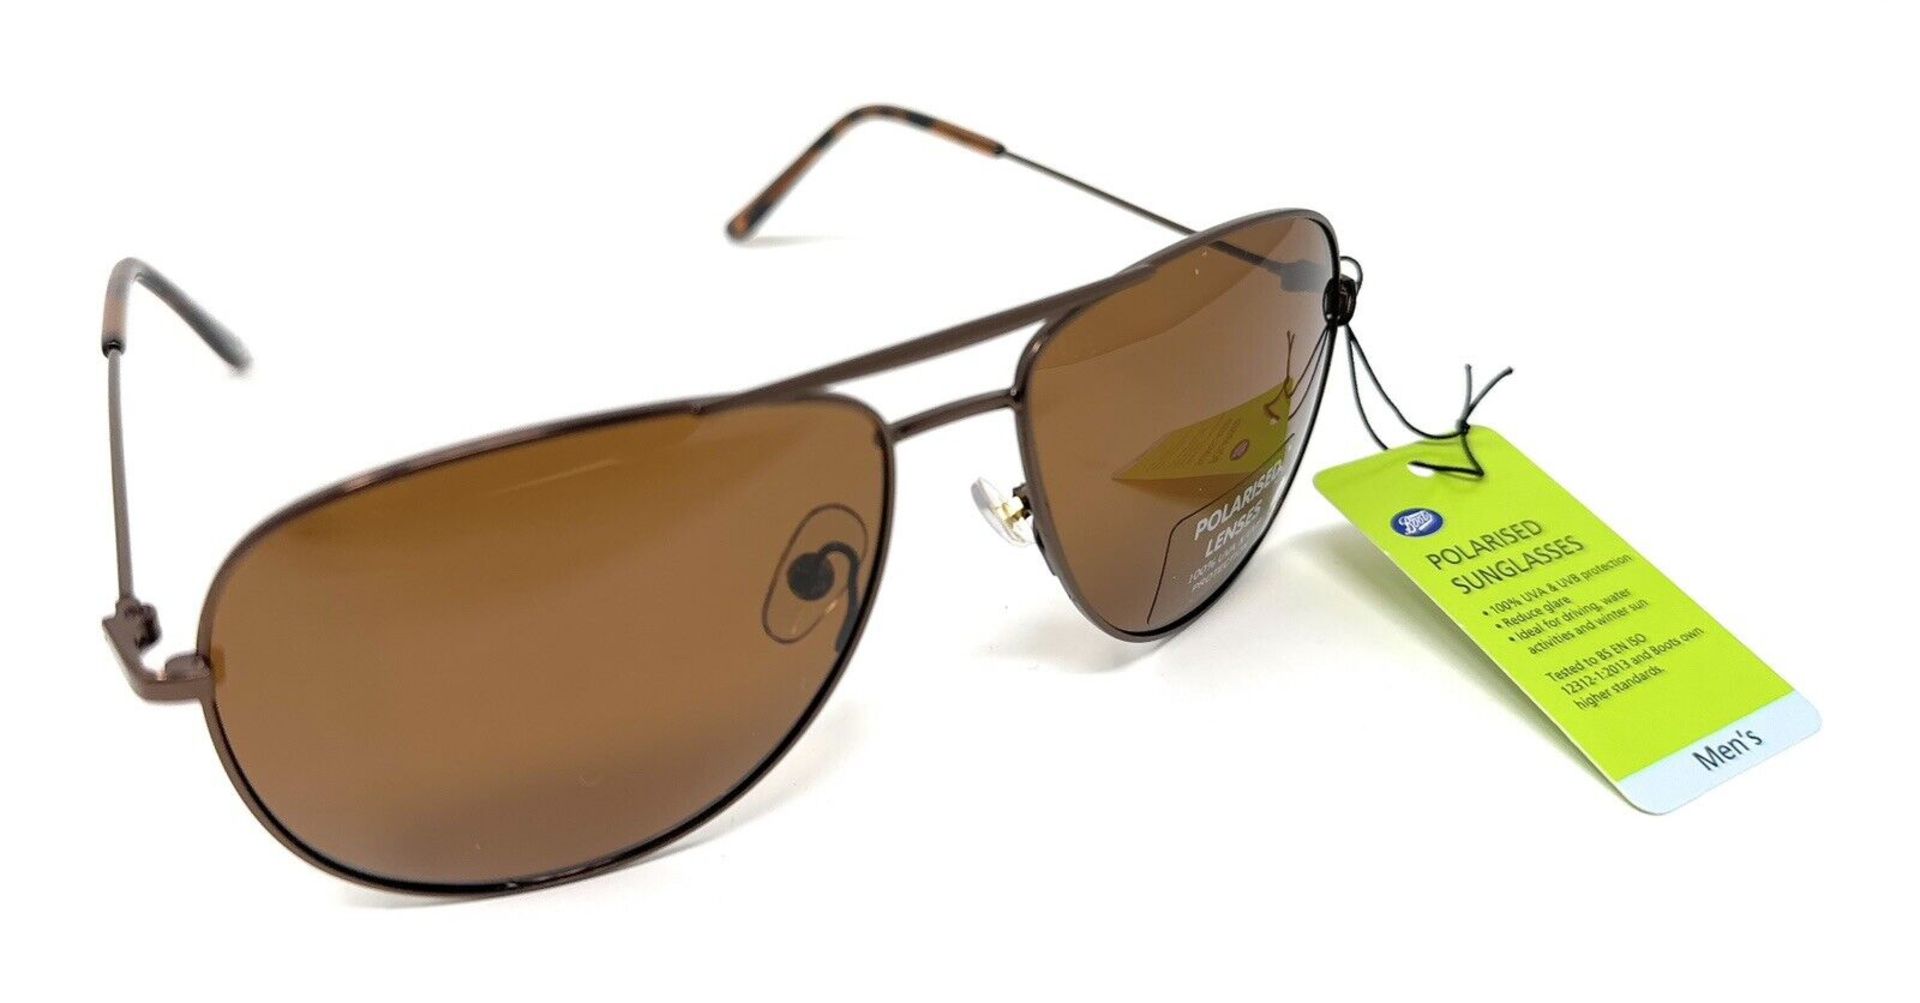 40 x Boots Polarised Lens Pilot Style Sunglasses 100% UVA - (NEW) - BOOTS RRP Â£1,320 ! - Image 2 of 7